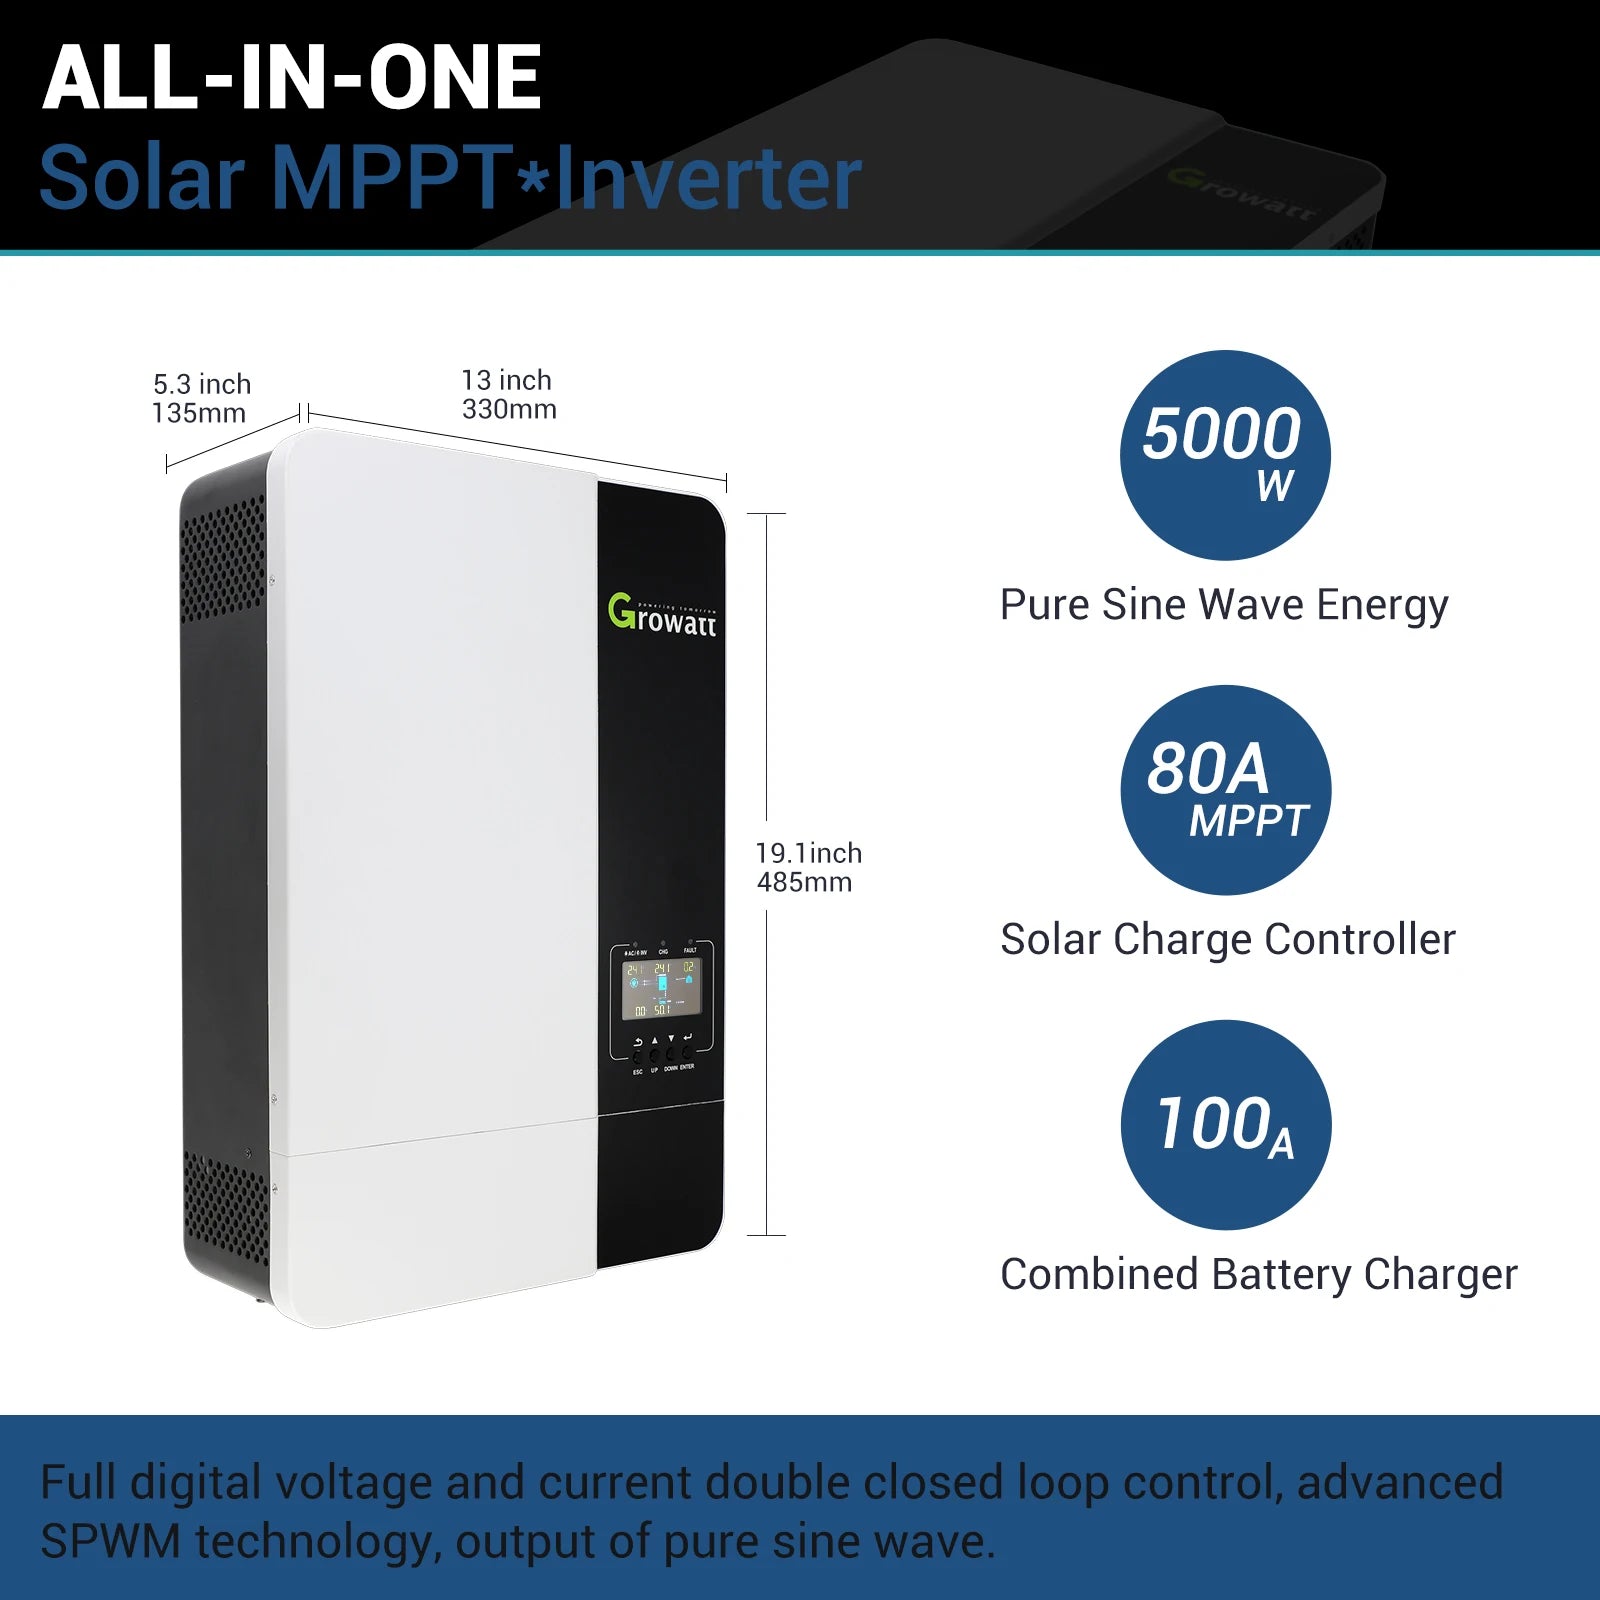 Advanced solar inverter with display, pure sine wave energy, and MPPT technology for off-grid systems up to 5000W.